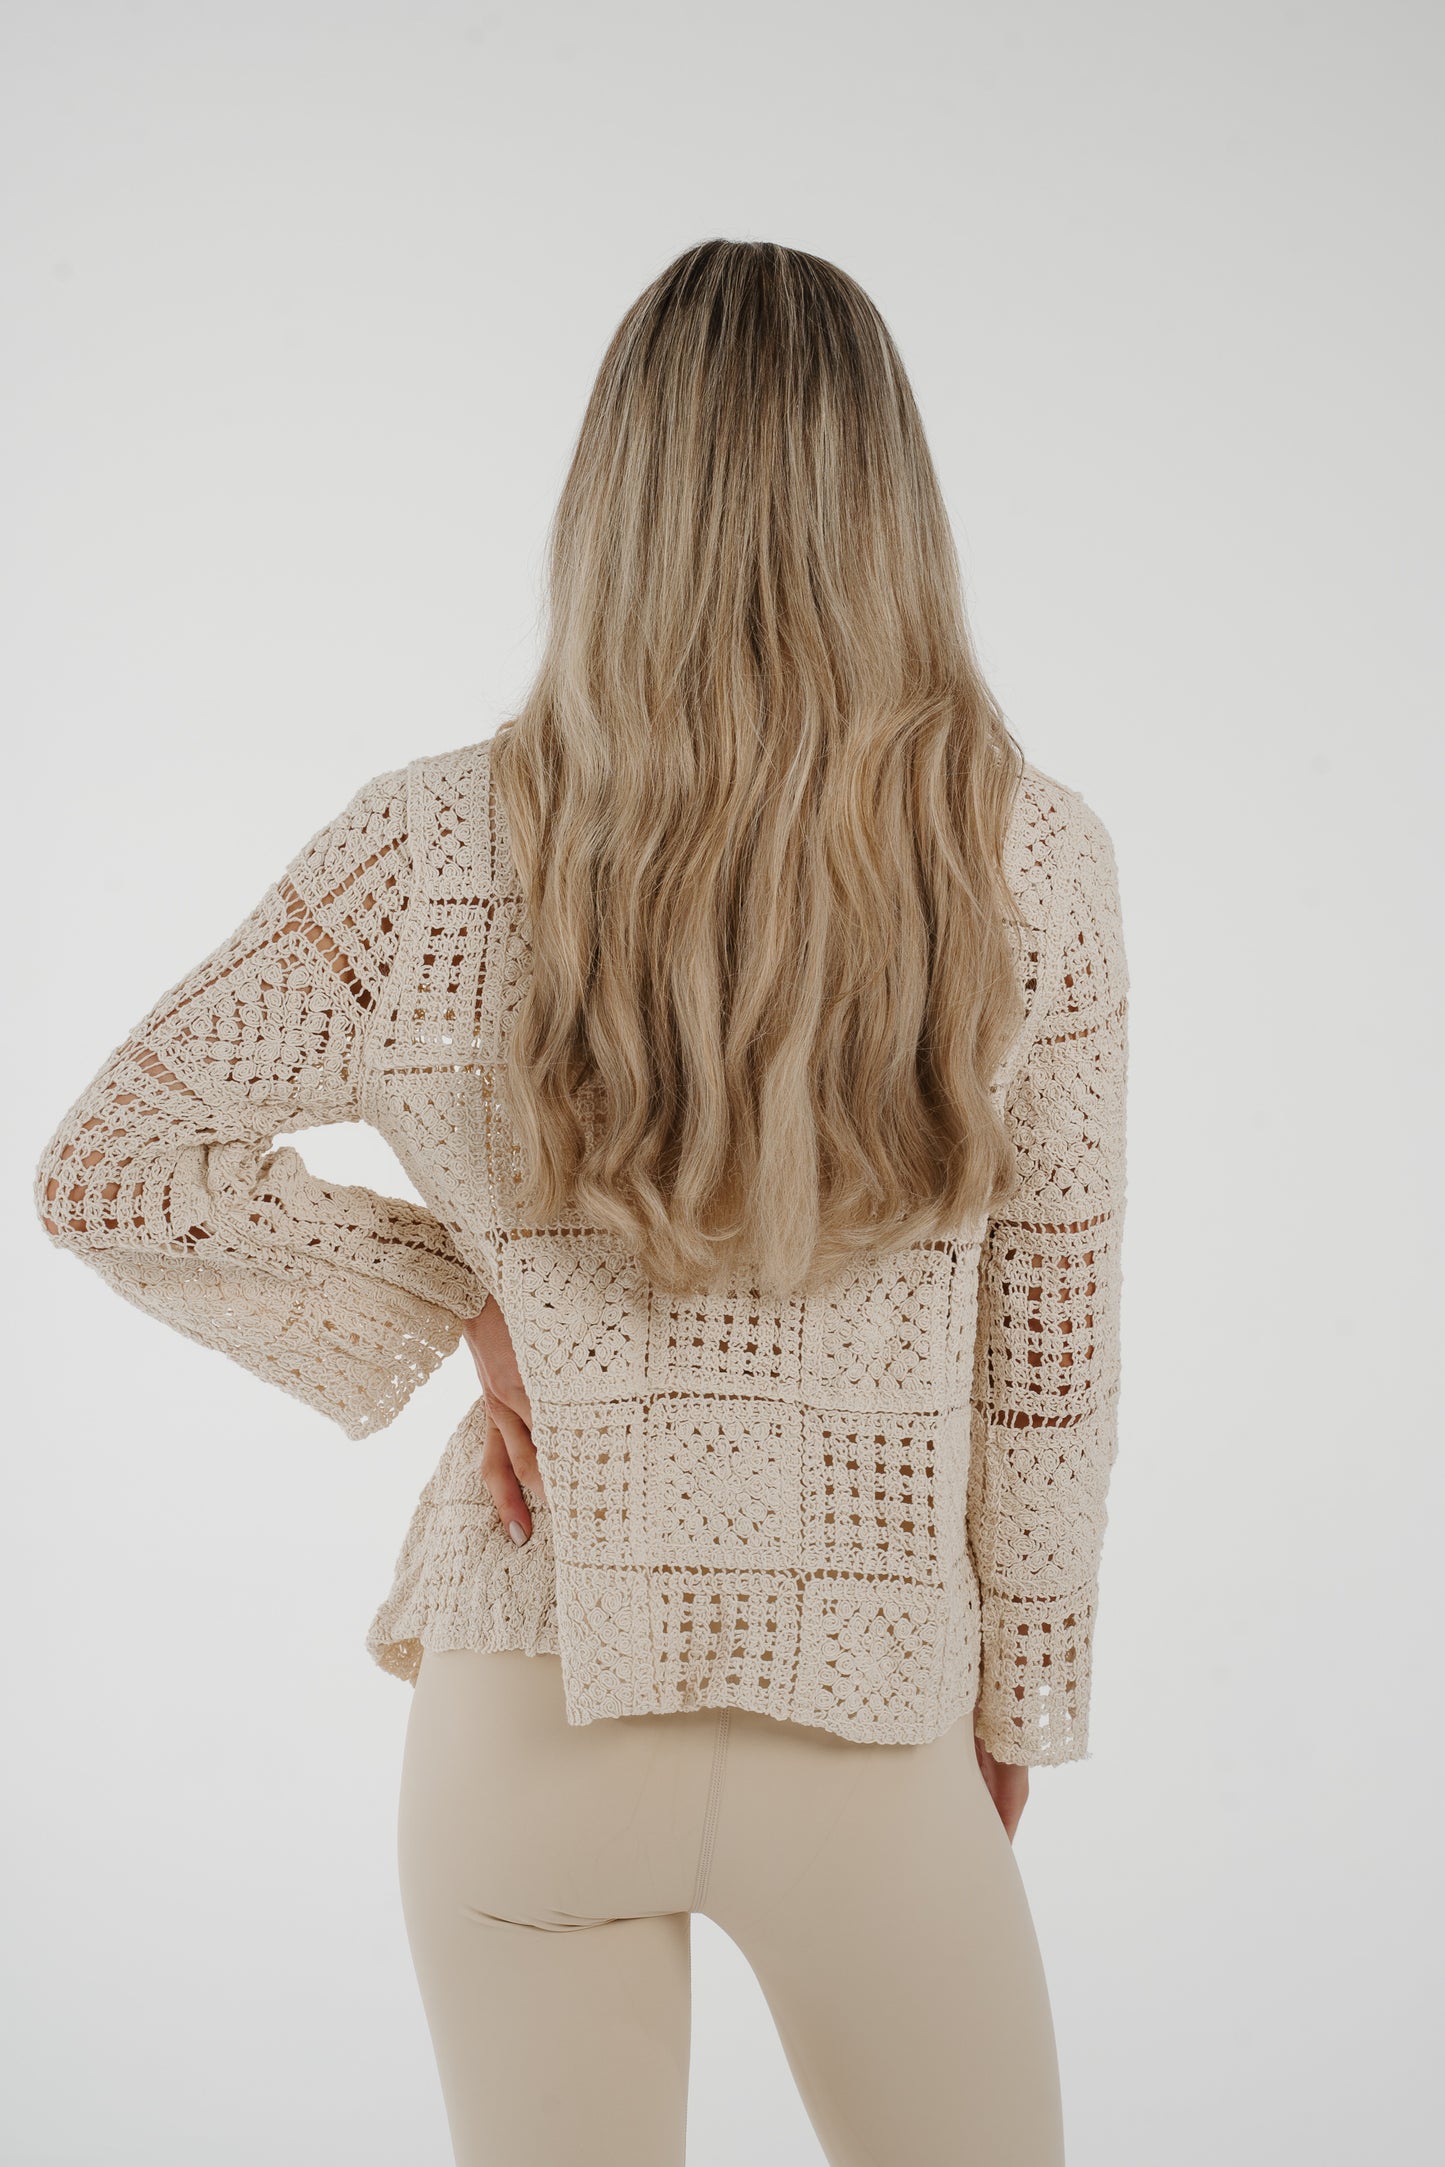 Indie Crochet Square Shirt In Neutral